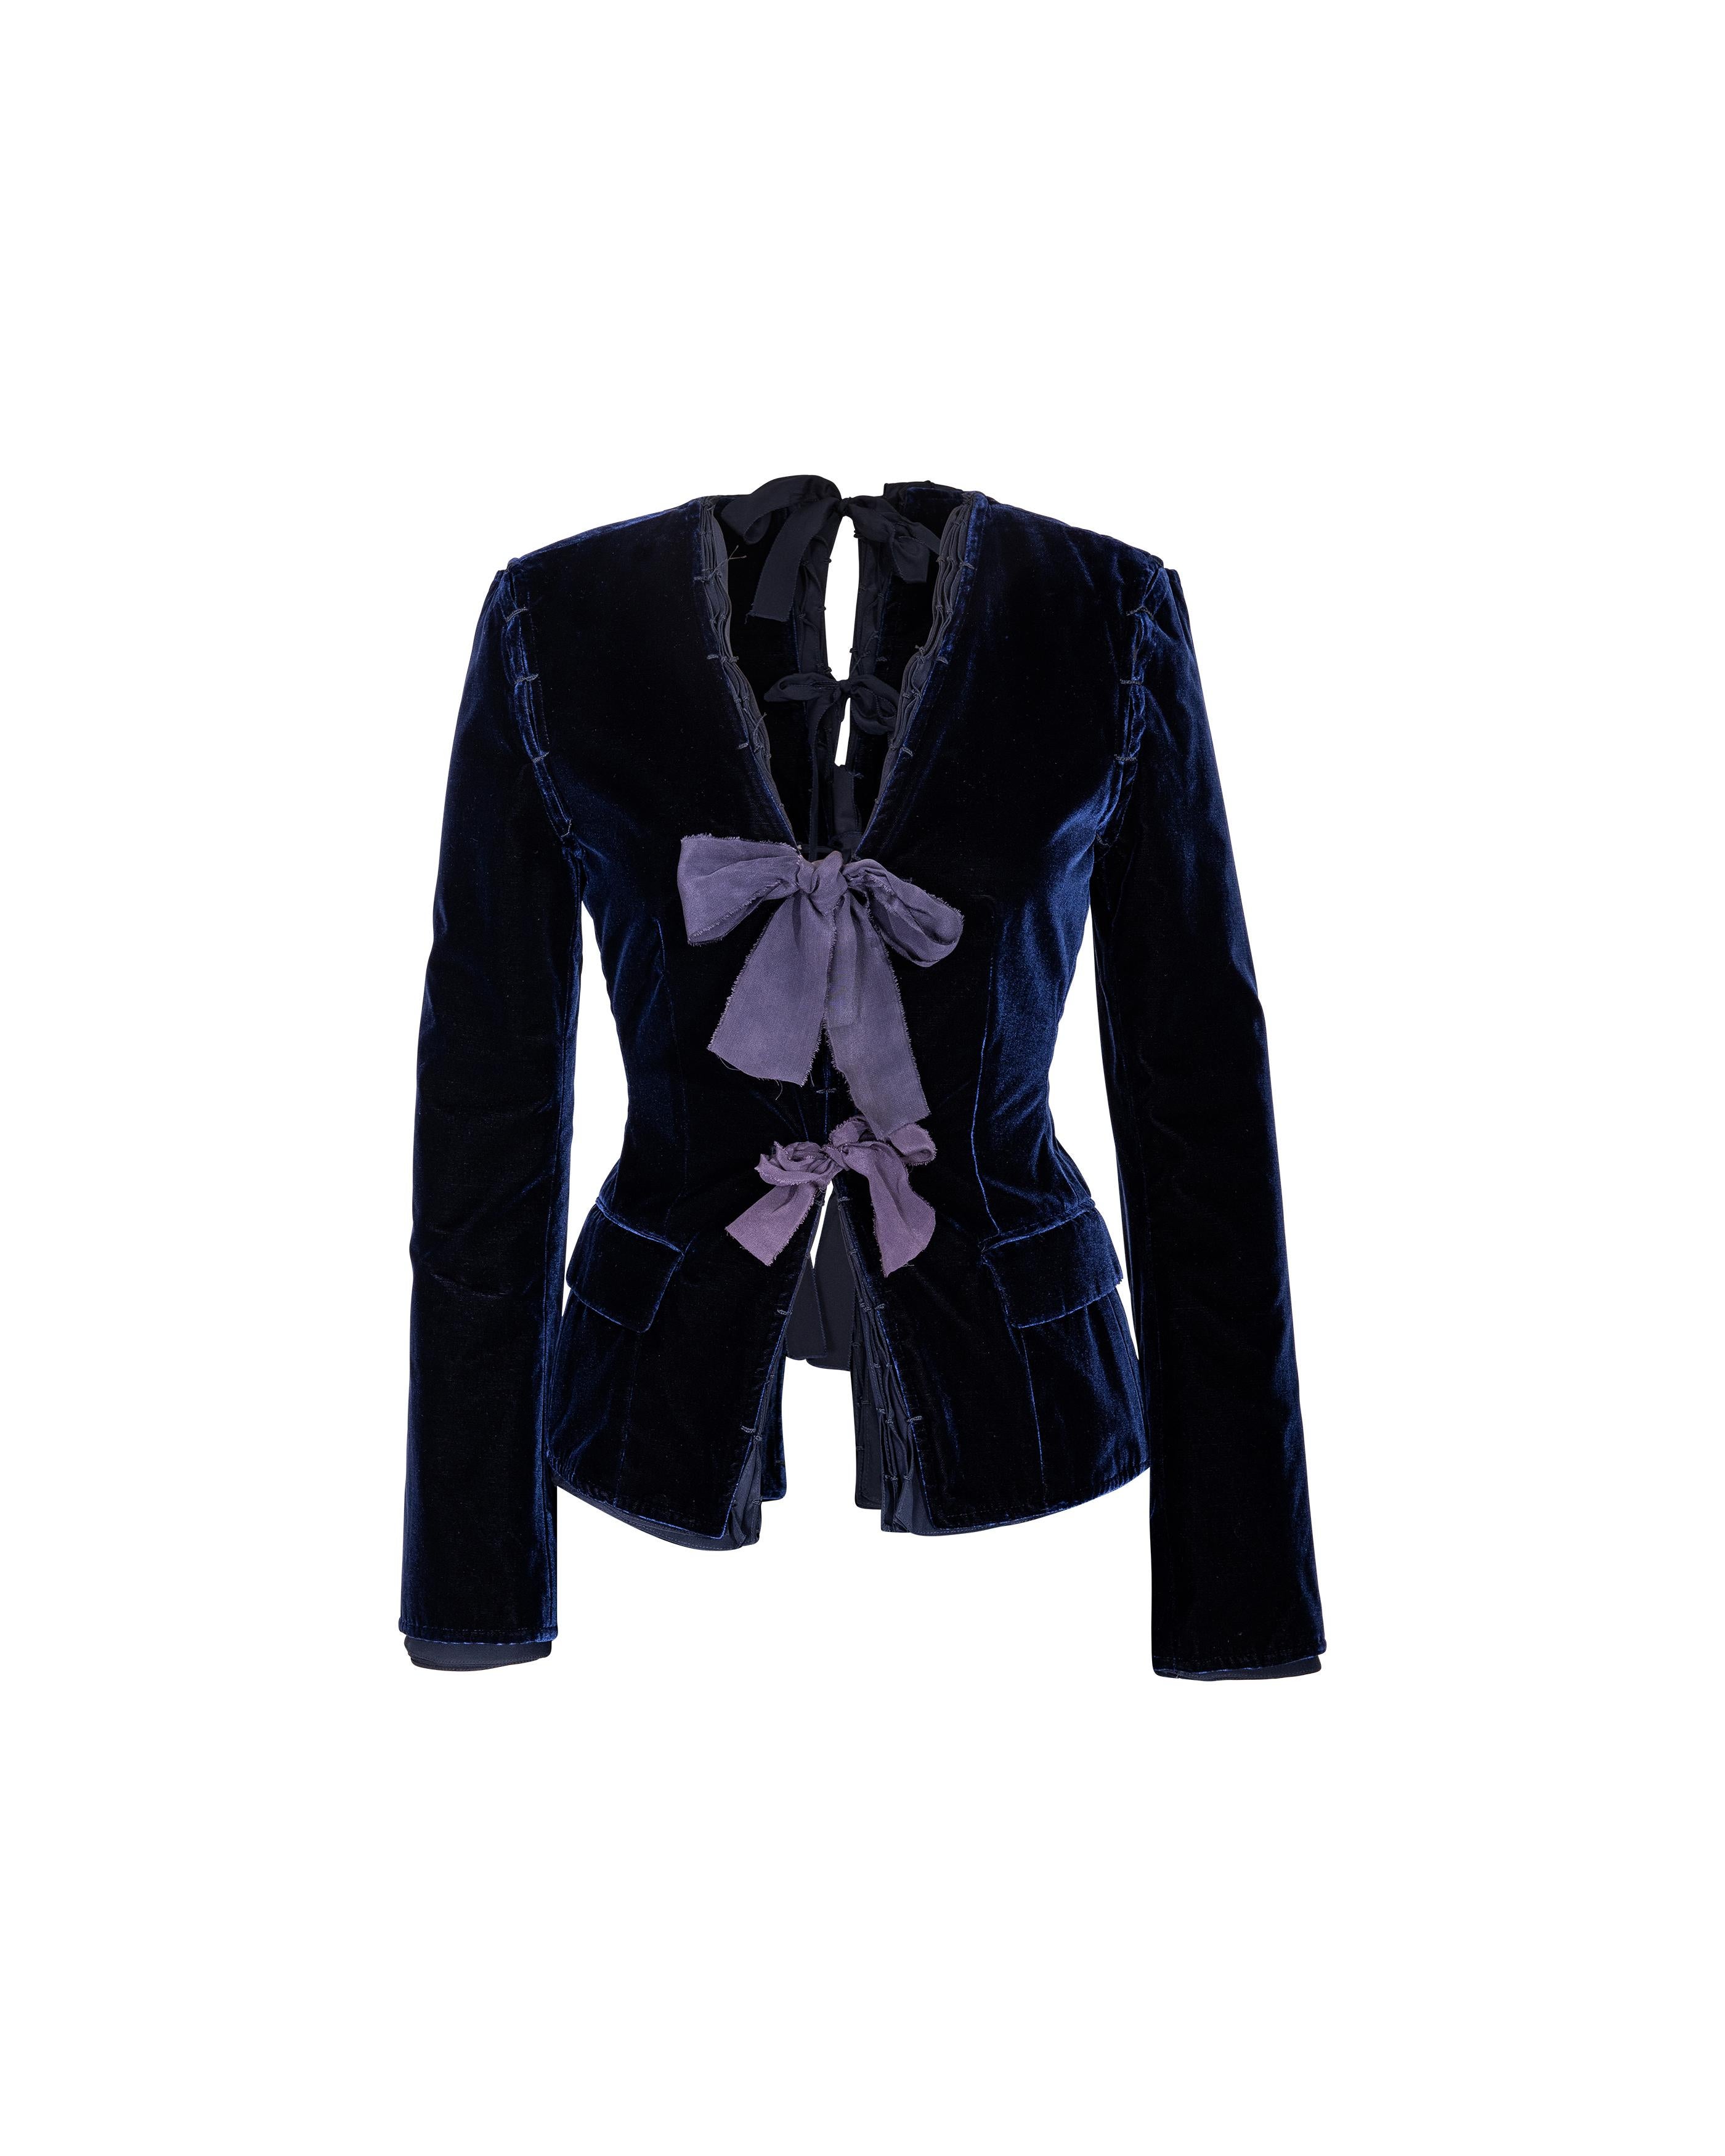 A/W 2002 Yves Saint Laurent by Tom Ford Blue Velvet and Silk Ribbons Suit Set 9